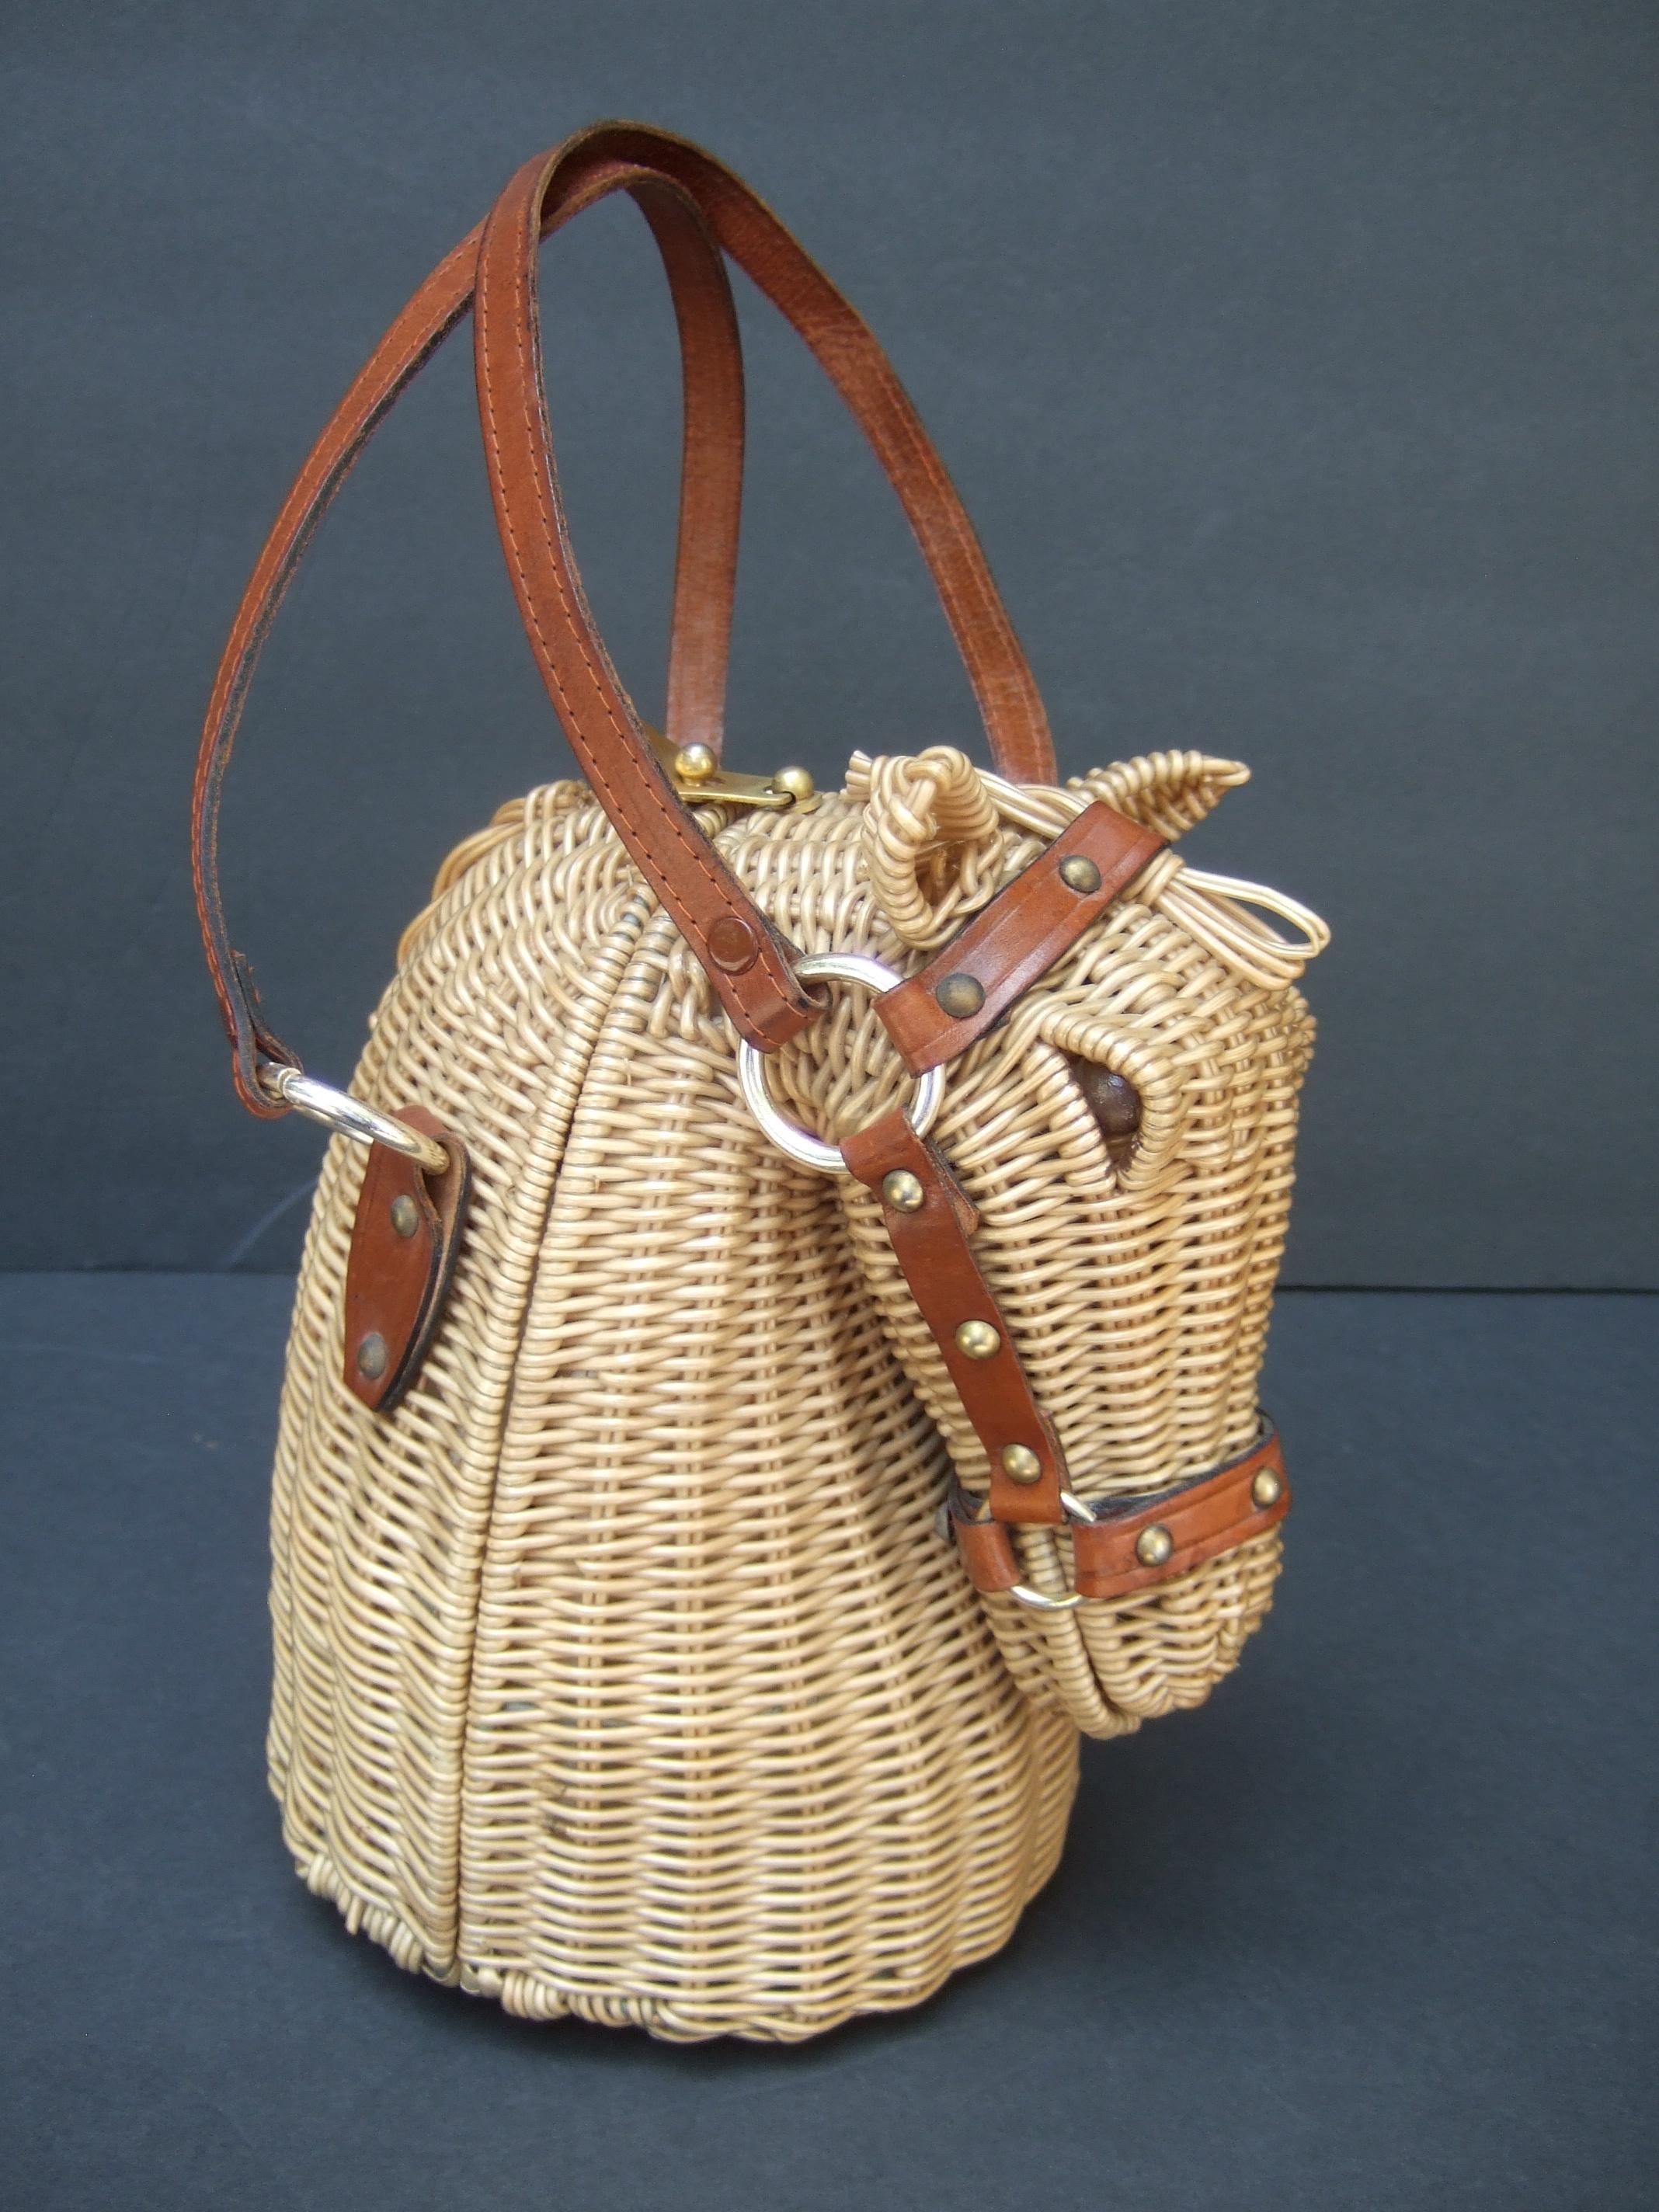 Extremely Rare Wicker Rattan Equine Handbag Designed by Marcus Brothers c 1970 6